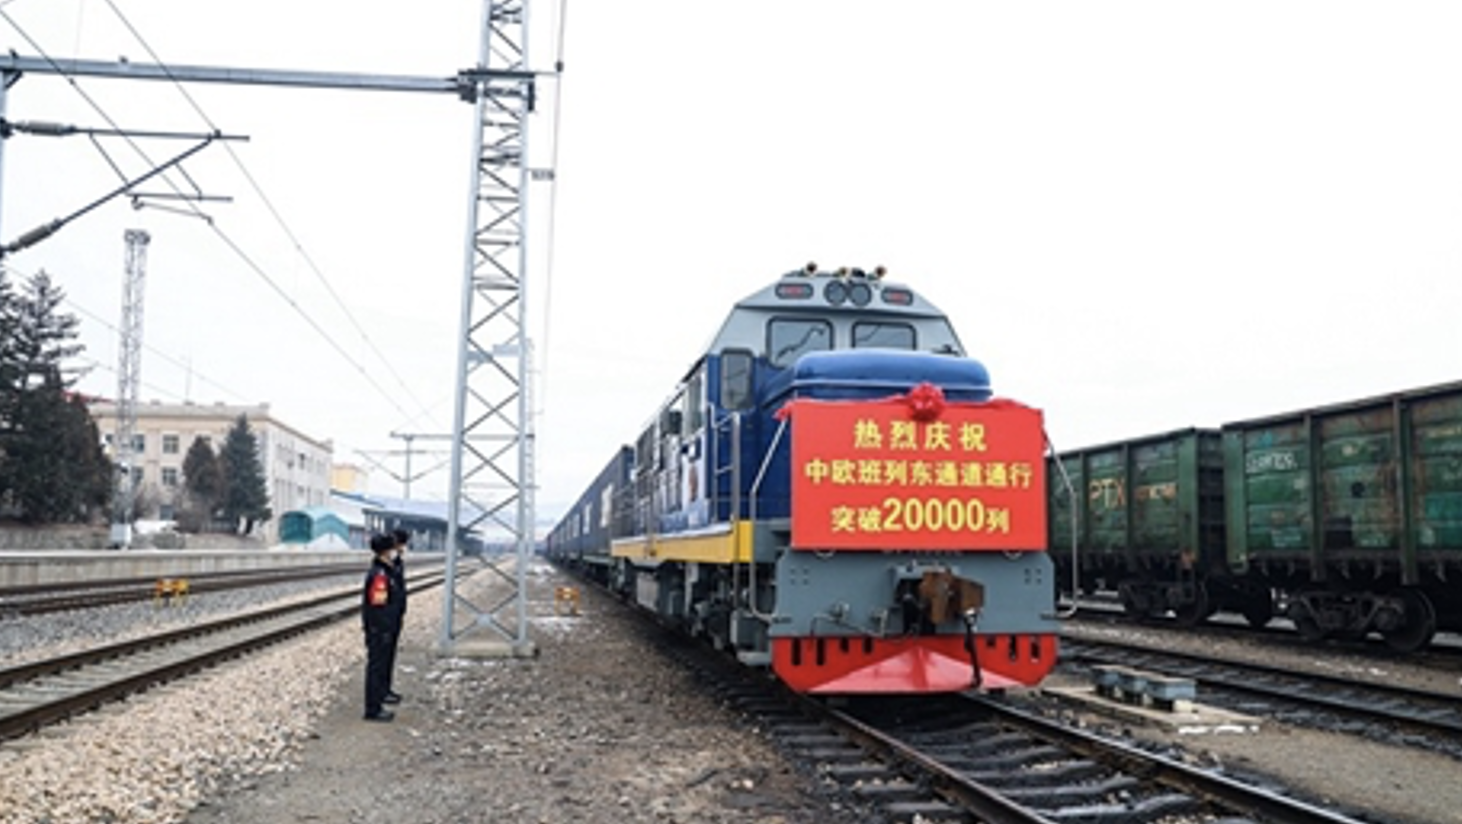 The cumulative number of freight trains from Harbin to Central Europe exceeded 20,000